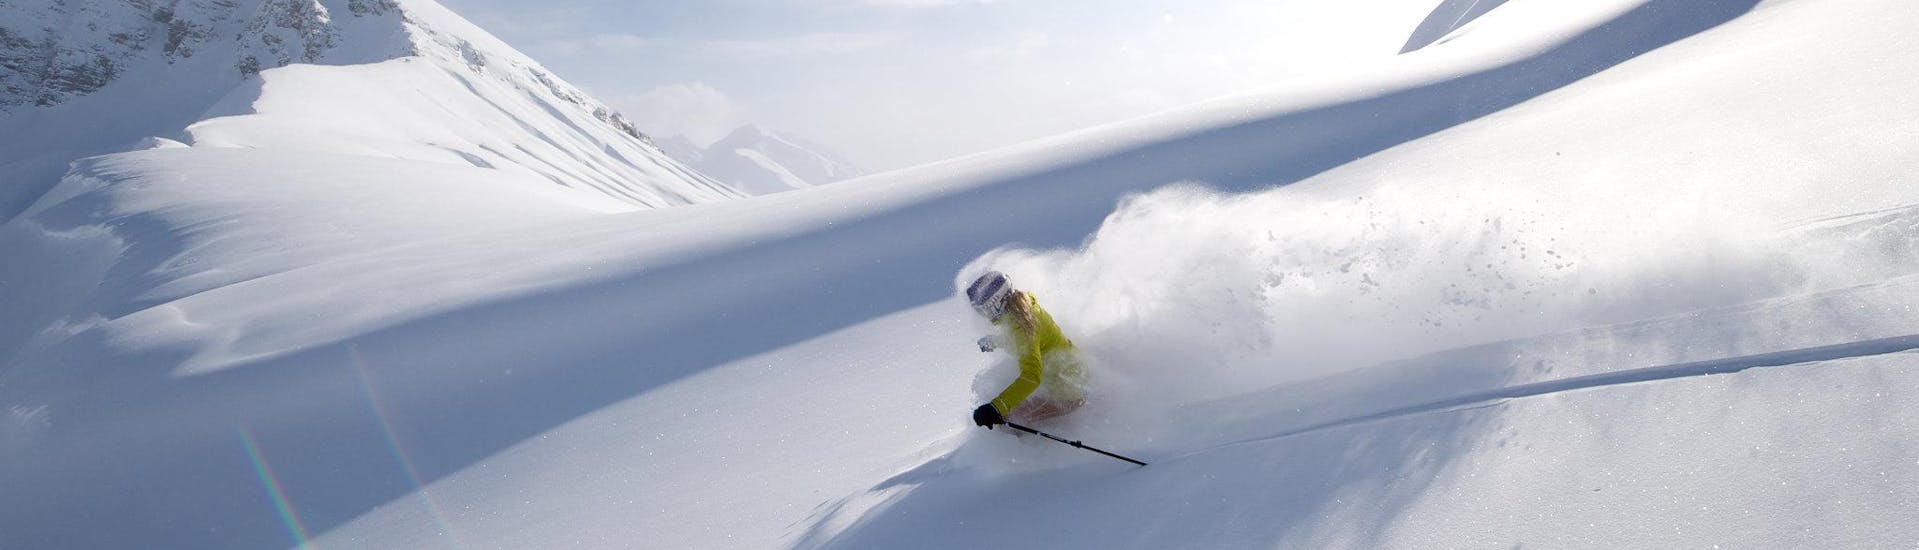 A skier is making his way down a deep powder snow slope during his off piste skiing lessons in Tyrol.